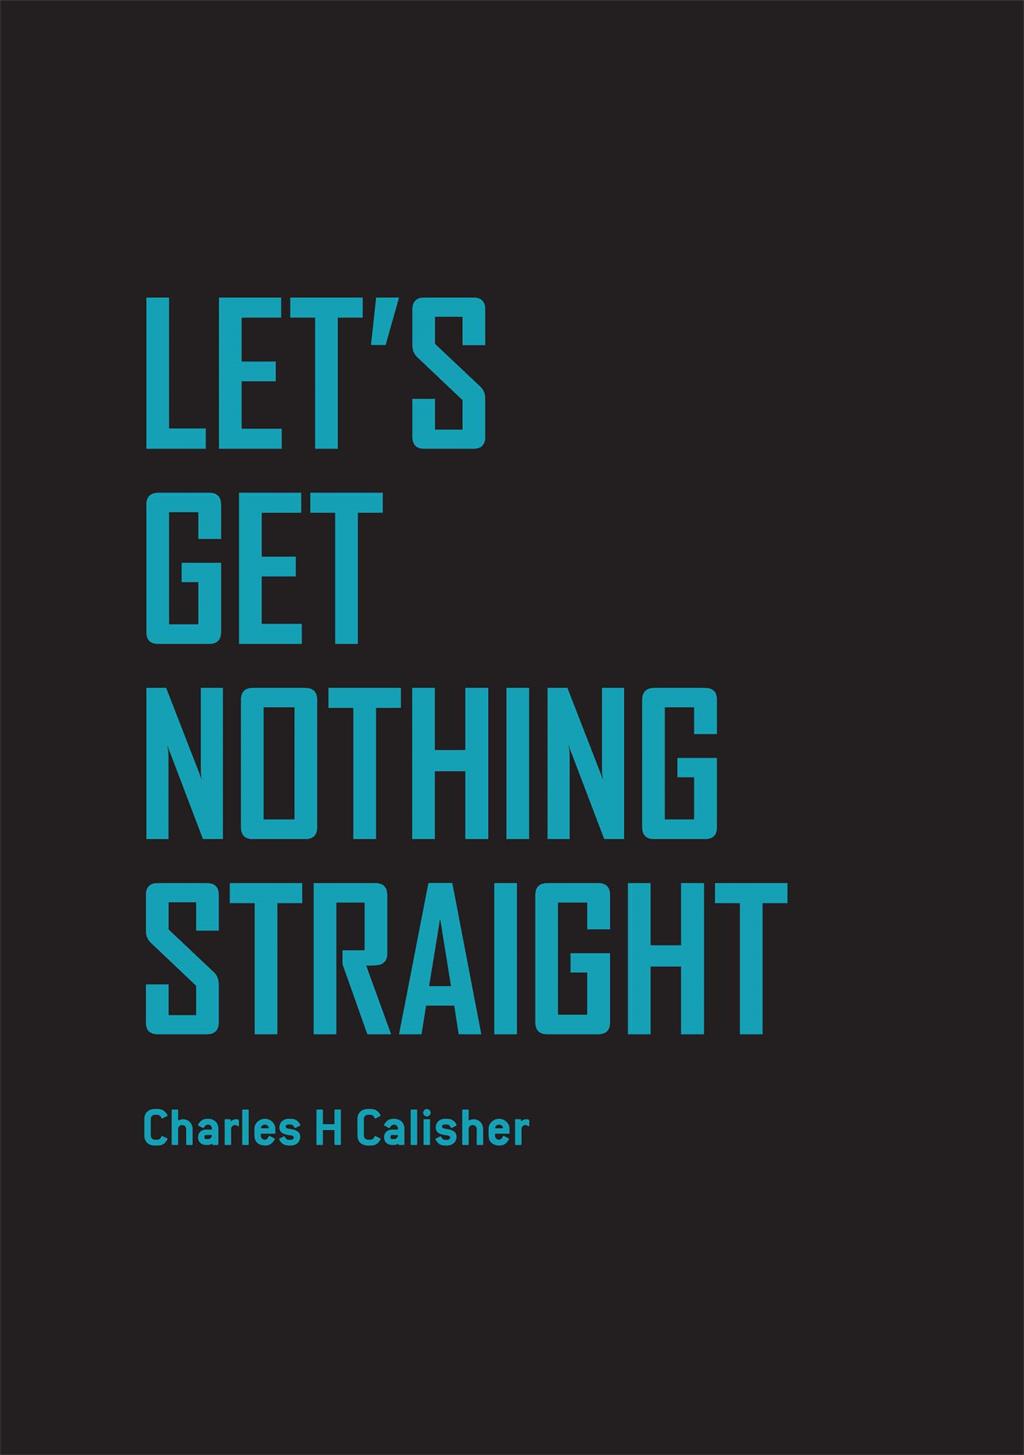 Charles H Calisher: LET’S GET NOTHING STRAIGHT